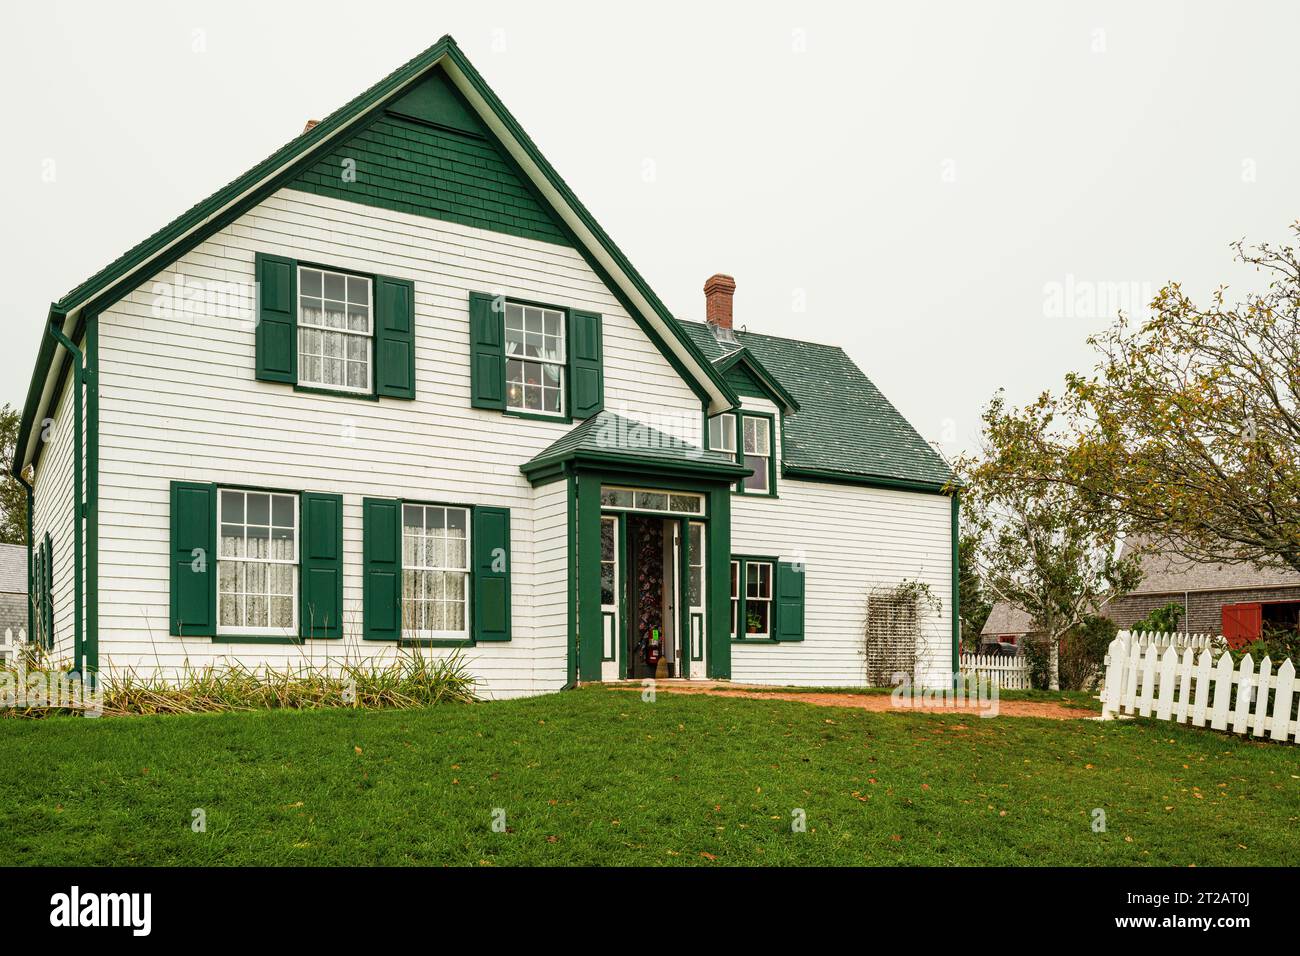 Green Gables Green Gables Heritage Place   Cavendish, Prince Edward Island, CAN Foto Stock